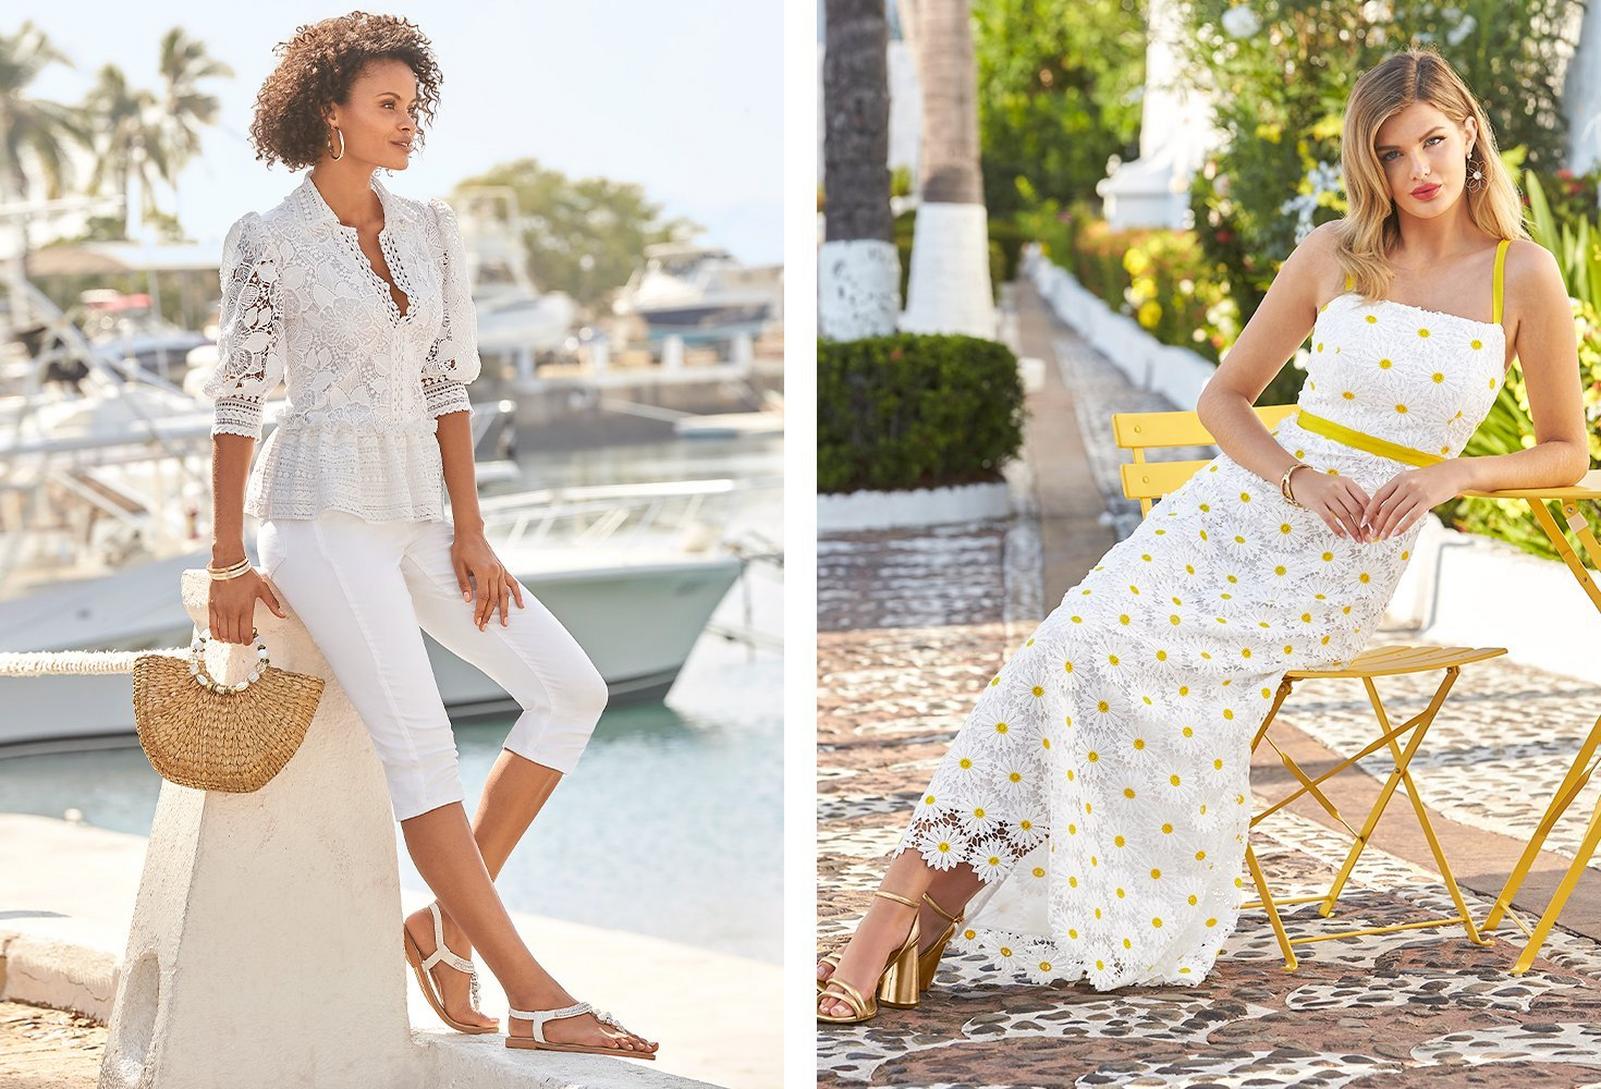 left model wearing a white lace peplum puff-sleeve top, white cropped jeans, pearl sandals, silver hoop earrings, and straw bag. right model wearing a white and yellow daisy lace sleeveless maxi dress and gold strappy heels.